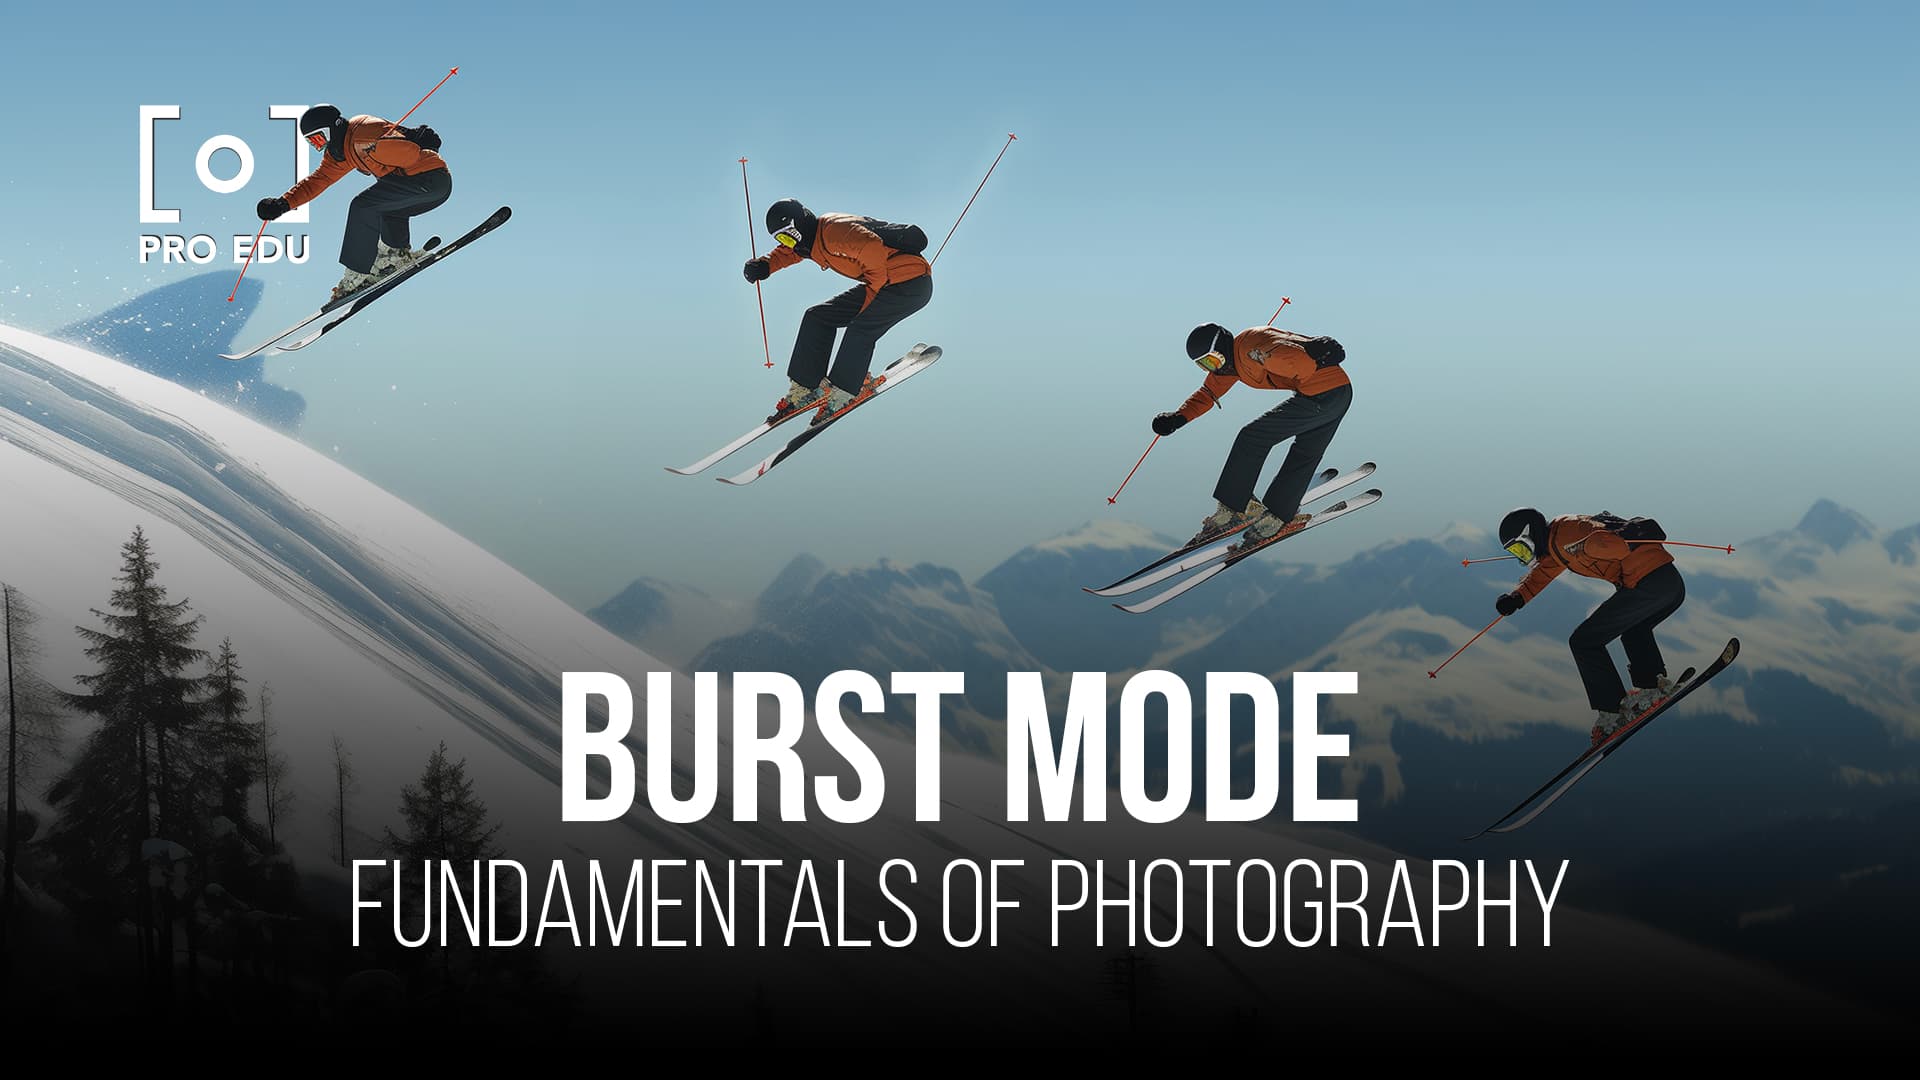 Capturing the perfect moment with burst mode photography, tips for fast action shots